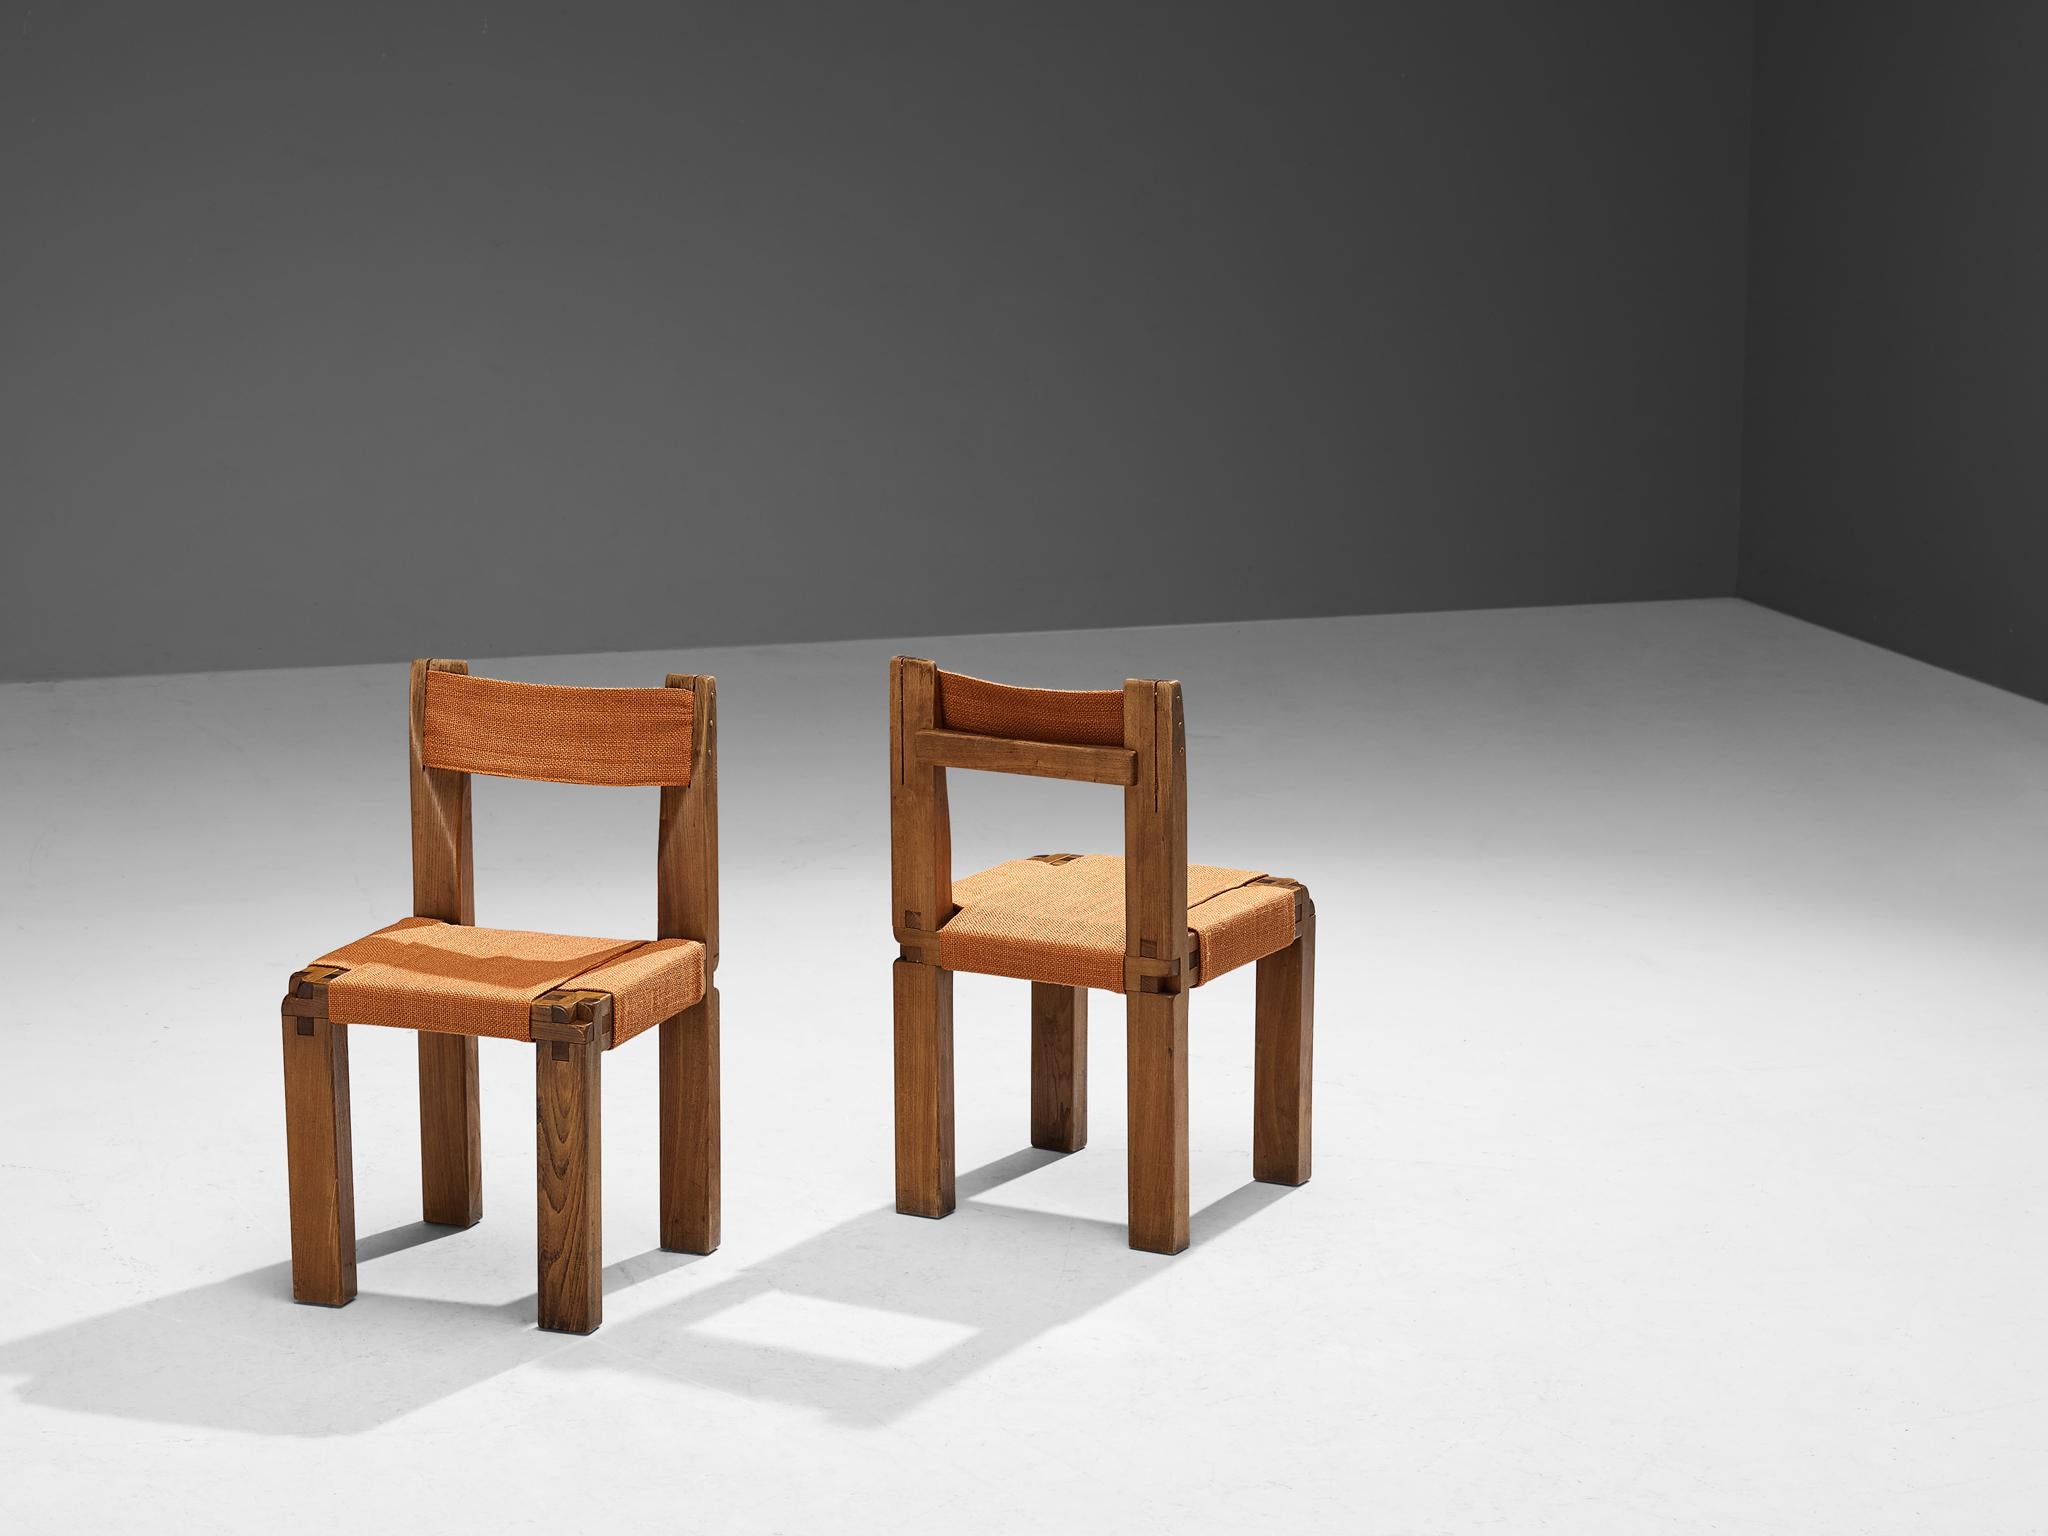 Pierre Chapo, pair of dining chairs model 'S11', elm, fabric, France, circa 1966.

This design is an early edition, created according to the original craft methodology of Pierre Chapo. A pair of chairs in solid elmwood with orange fabric seating and